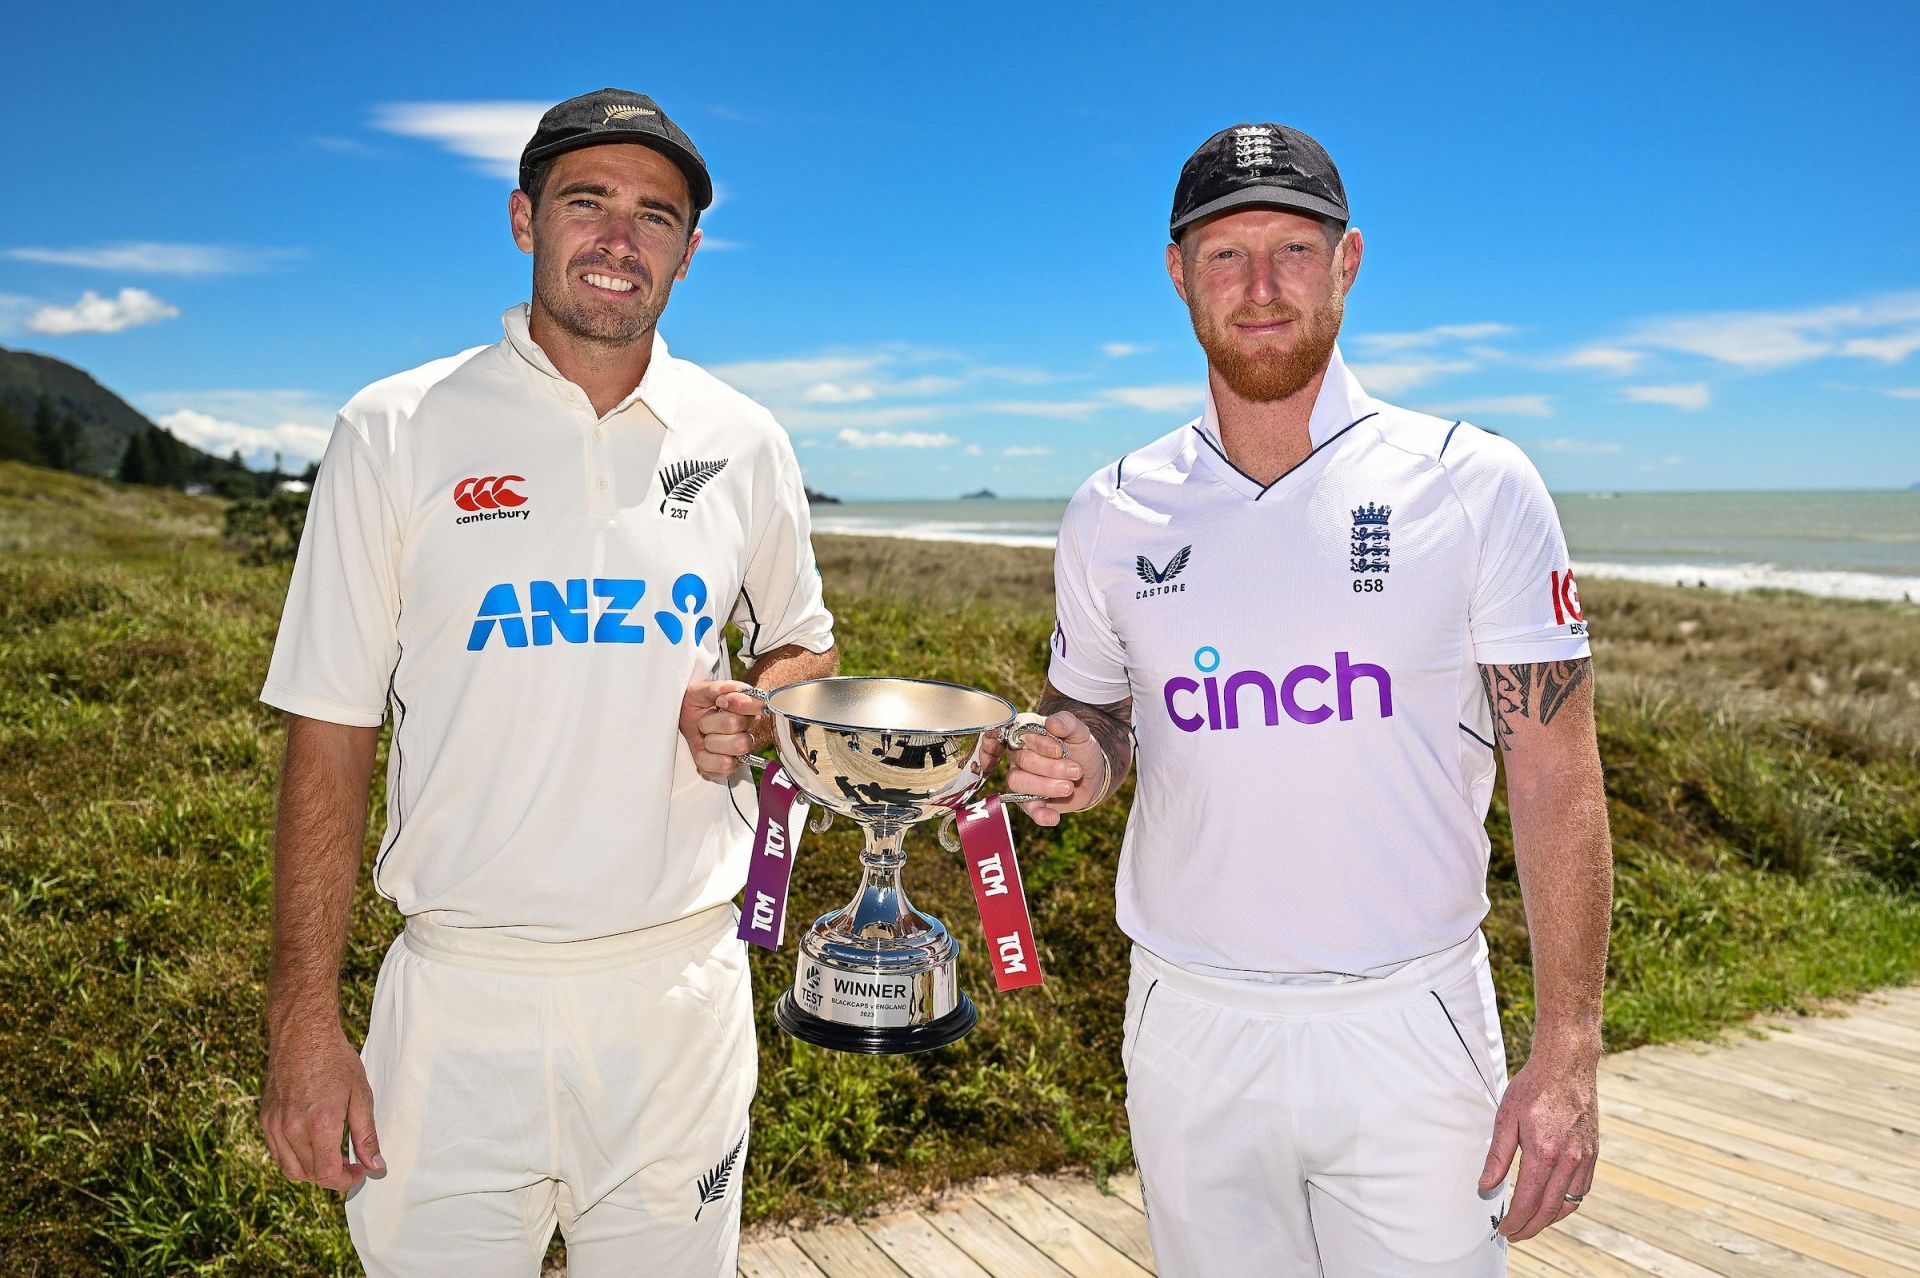 Tim Southee and Ben Stokes (Image: Blackcaps/Twitter)